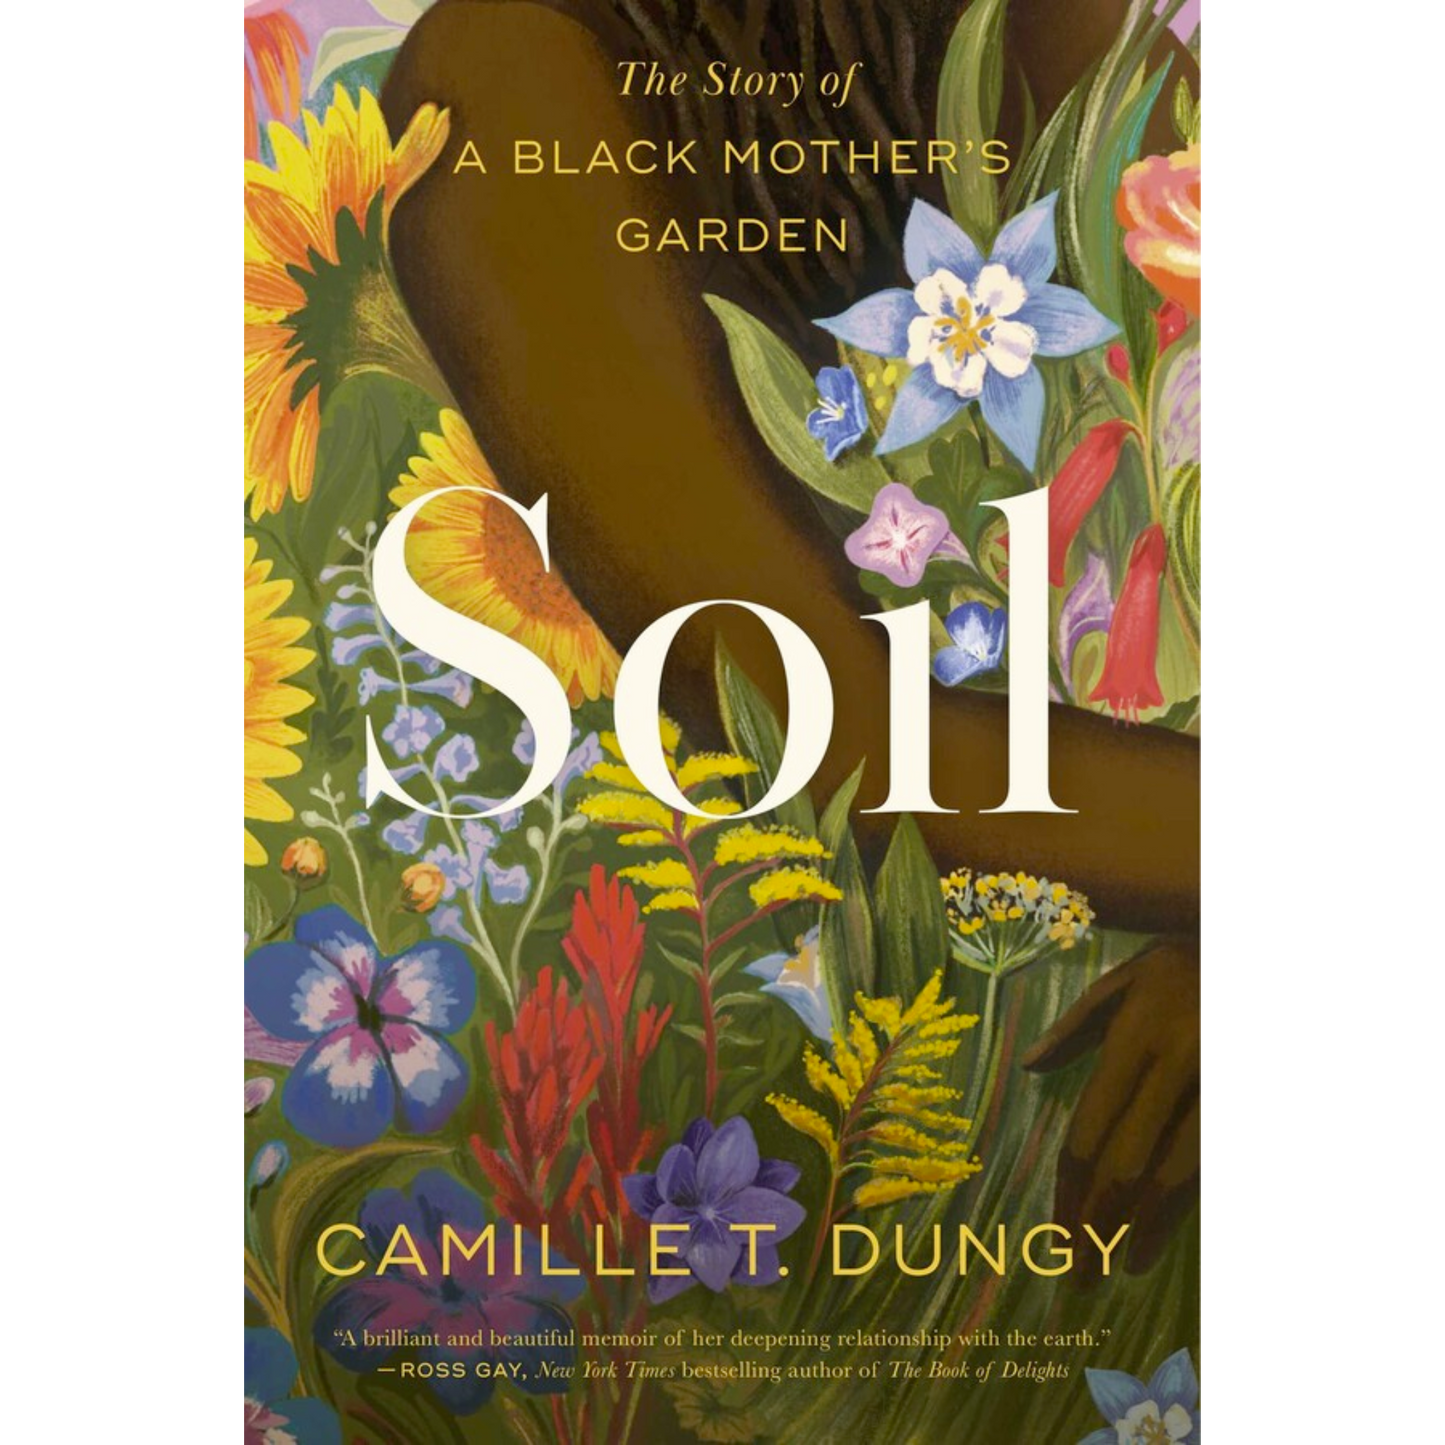 soil camille t dungy